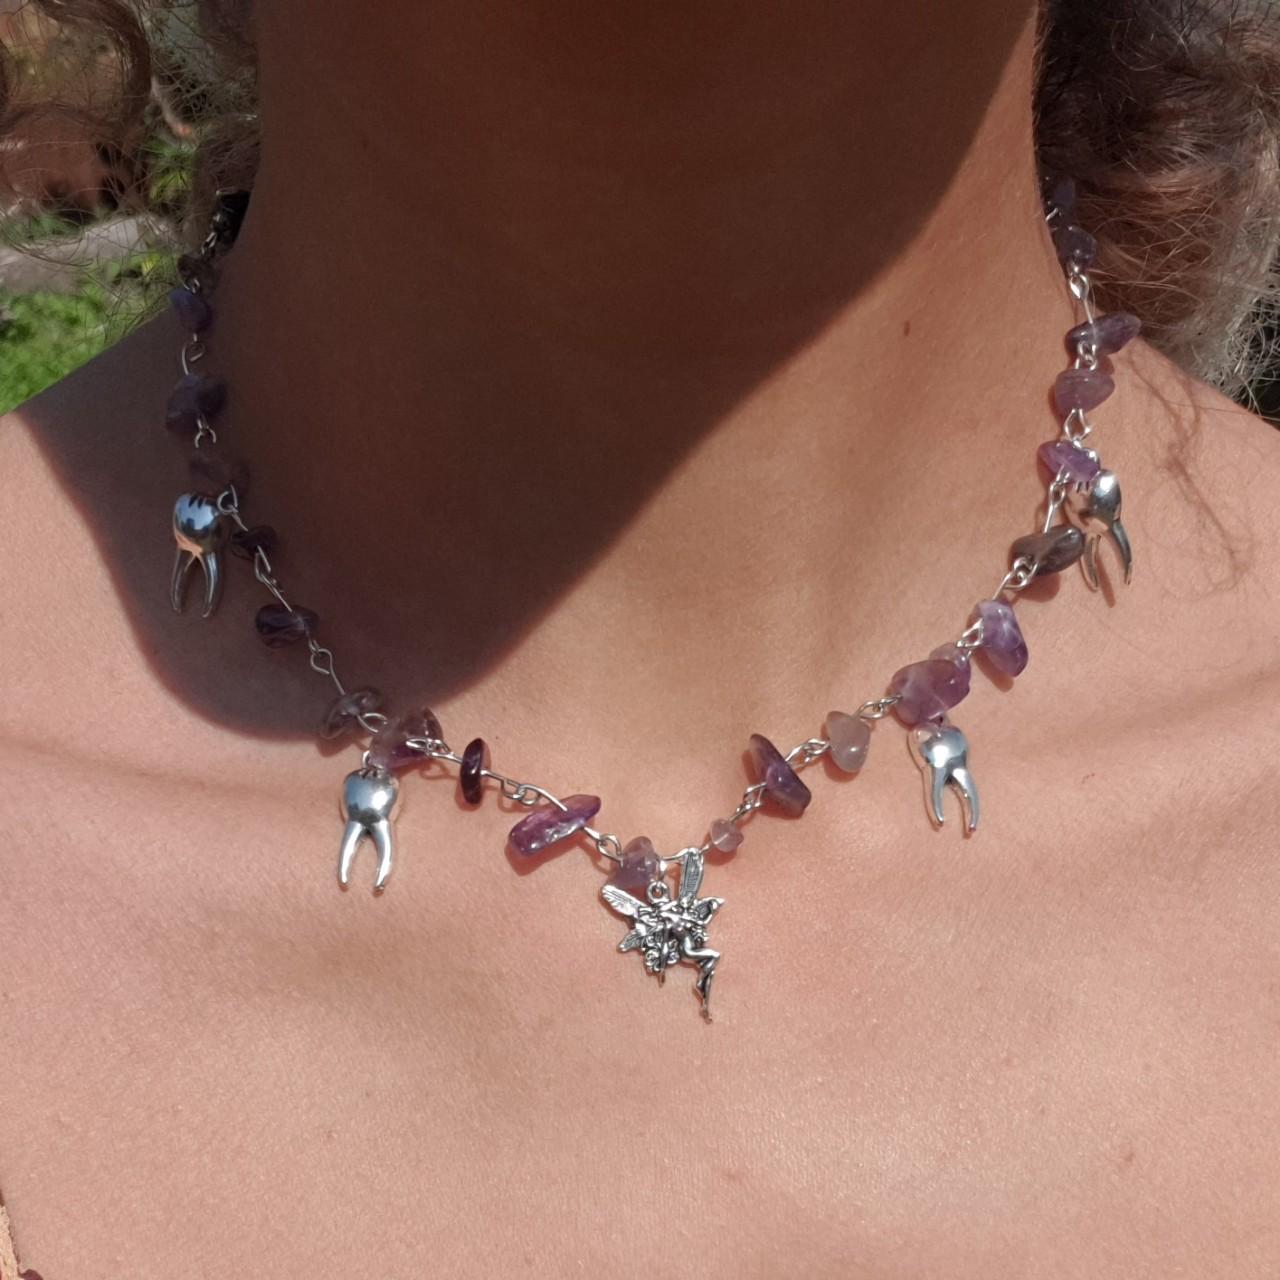 This Little Fairy' Charm Necklace